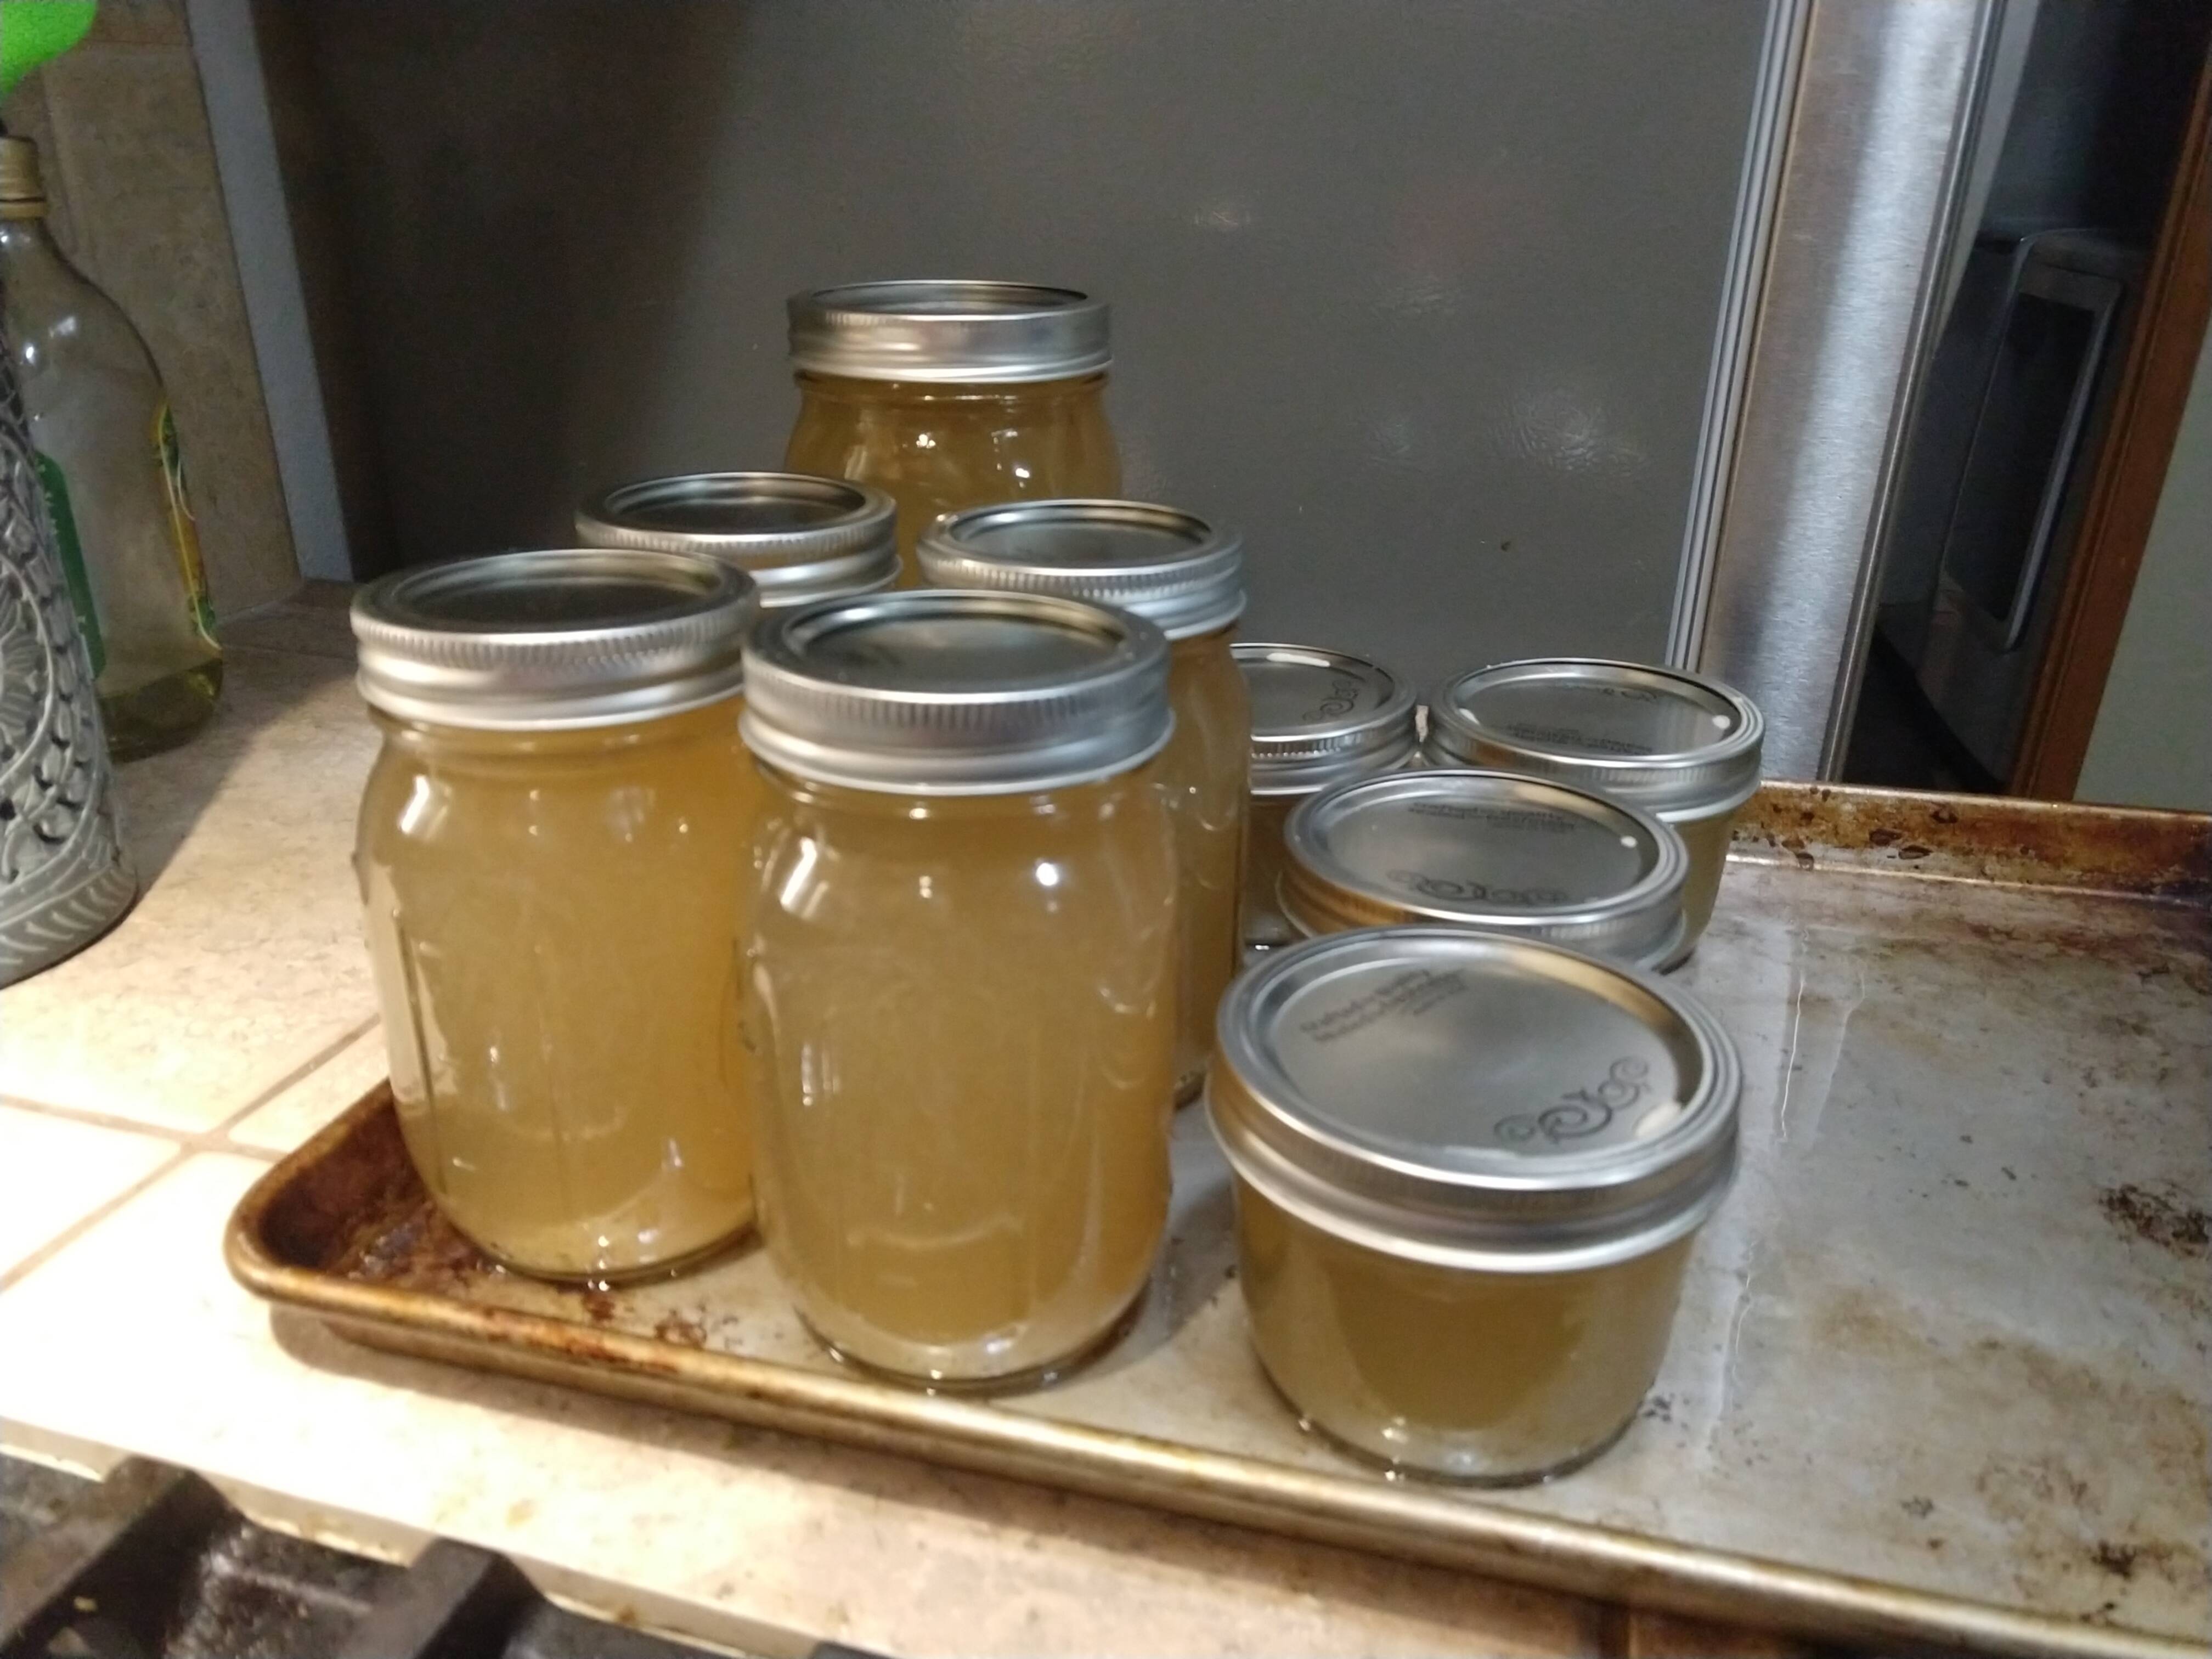 Canned wort